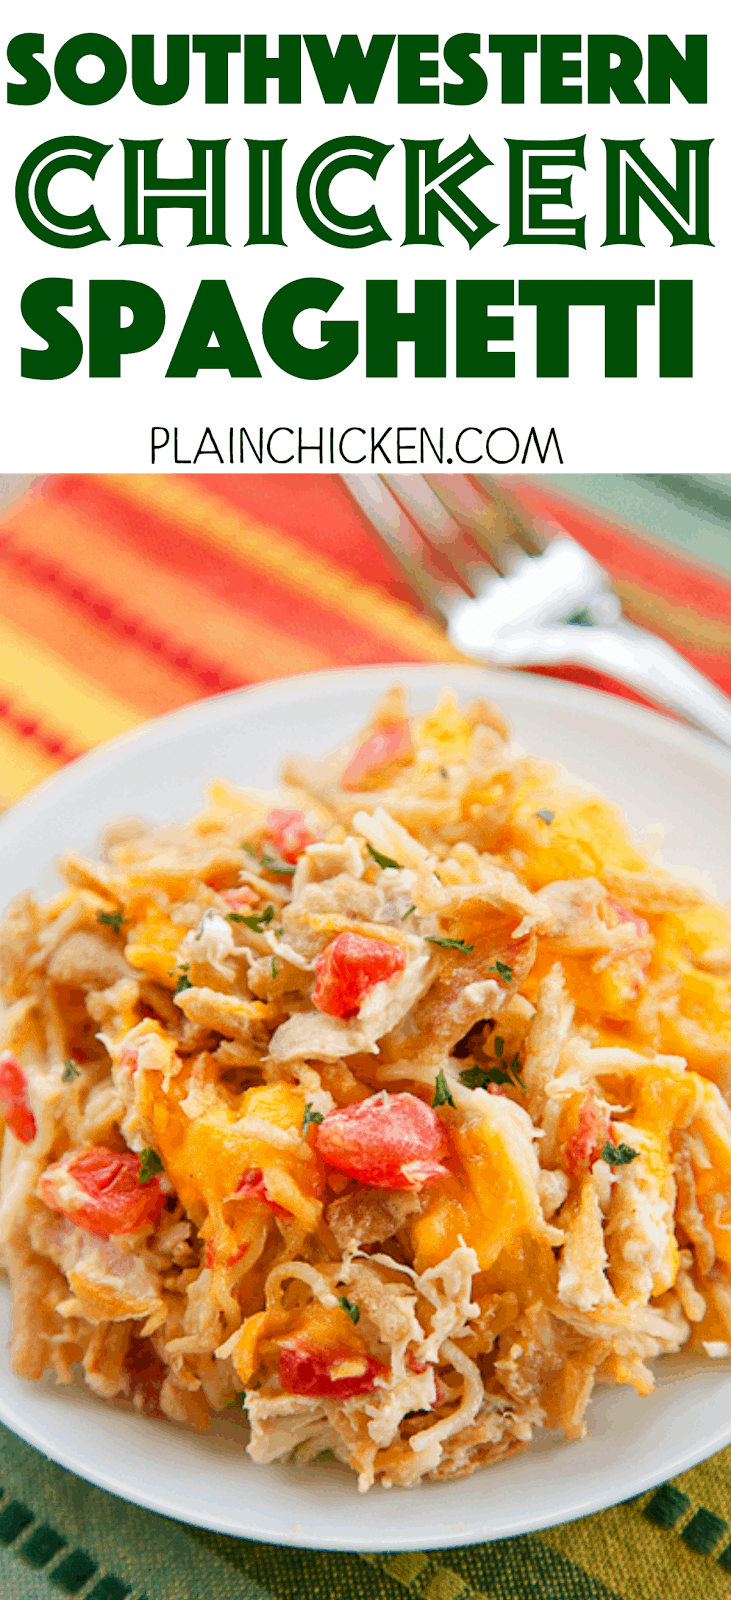 Southwestern Chicken Spaghetti - THE BEST!! Angel hair pasta, chicken, cream of chicken soup, sour cream, onion, garlic, Rotel, cheddar cheese and French fried onions. A new family favorite! Great freezer meal! Always a hit!